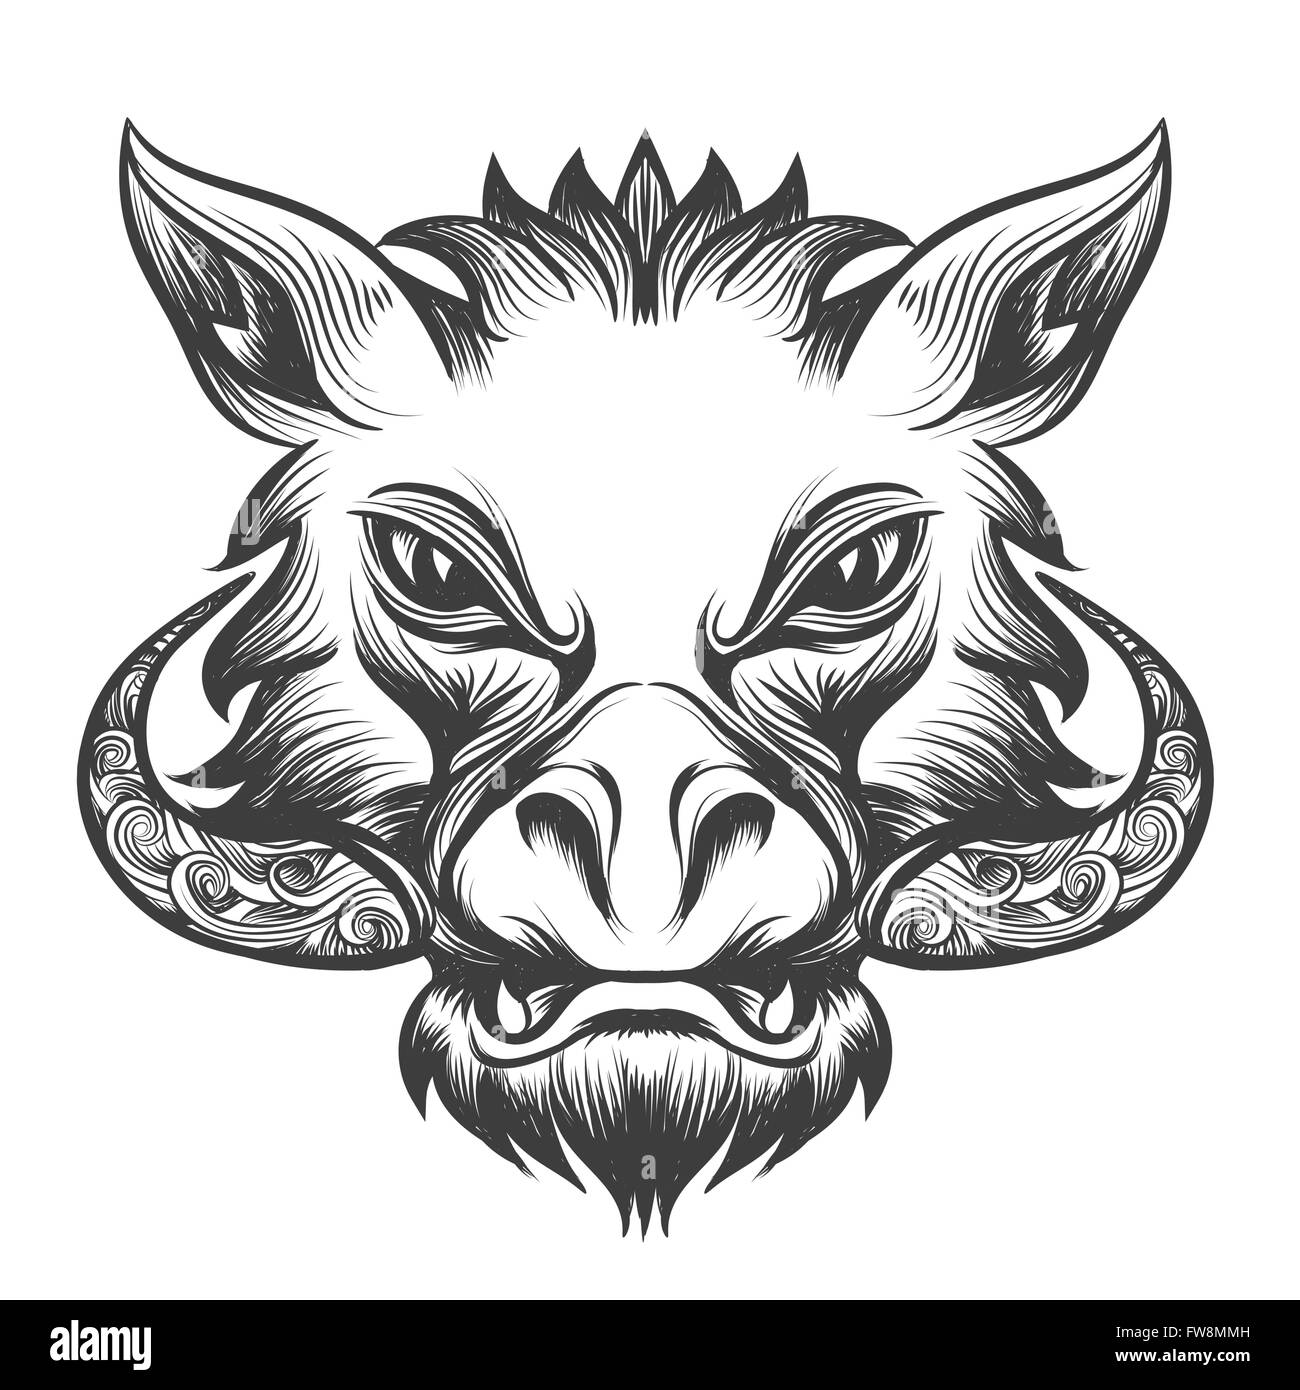 Boar head drawn in tattoo style. Isolated on white. Stock Vector